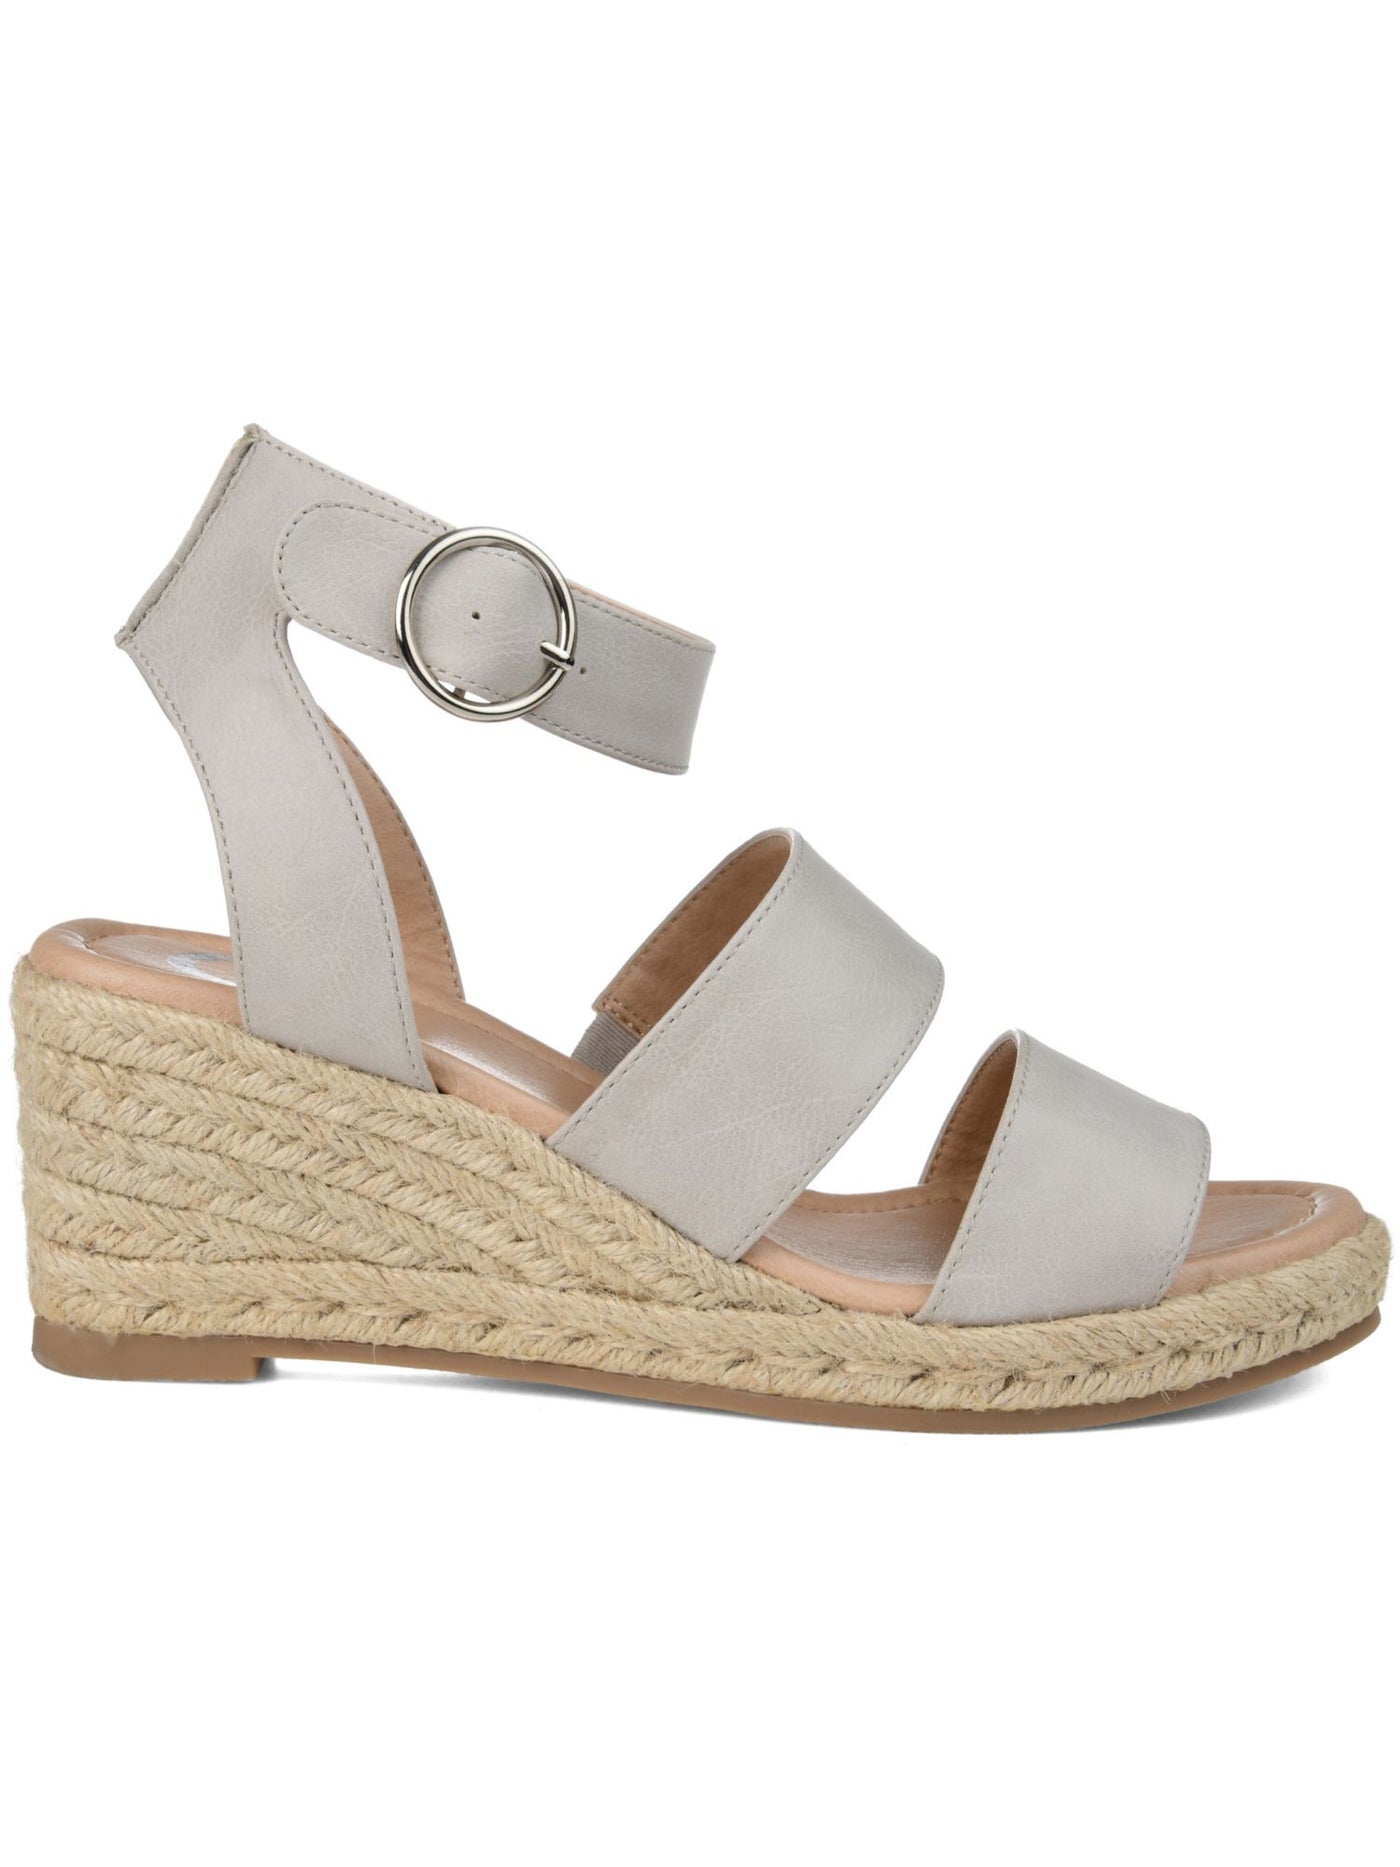 JOURNEE COLLECTION Womens Gray Open Toe Wedge Buckle Espadrille Shoes 8